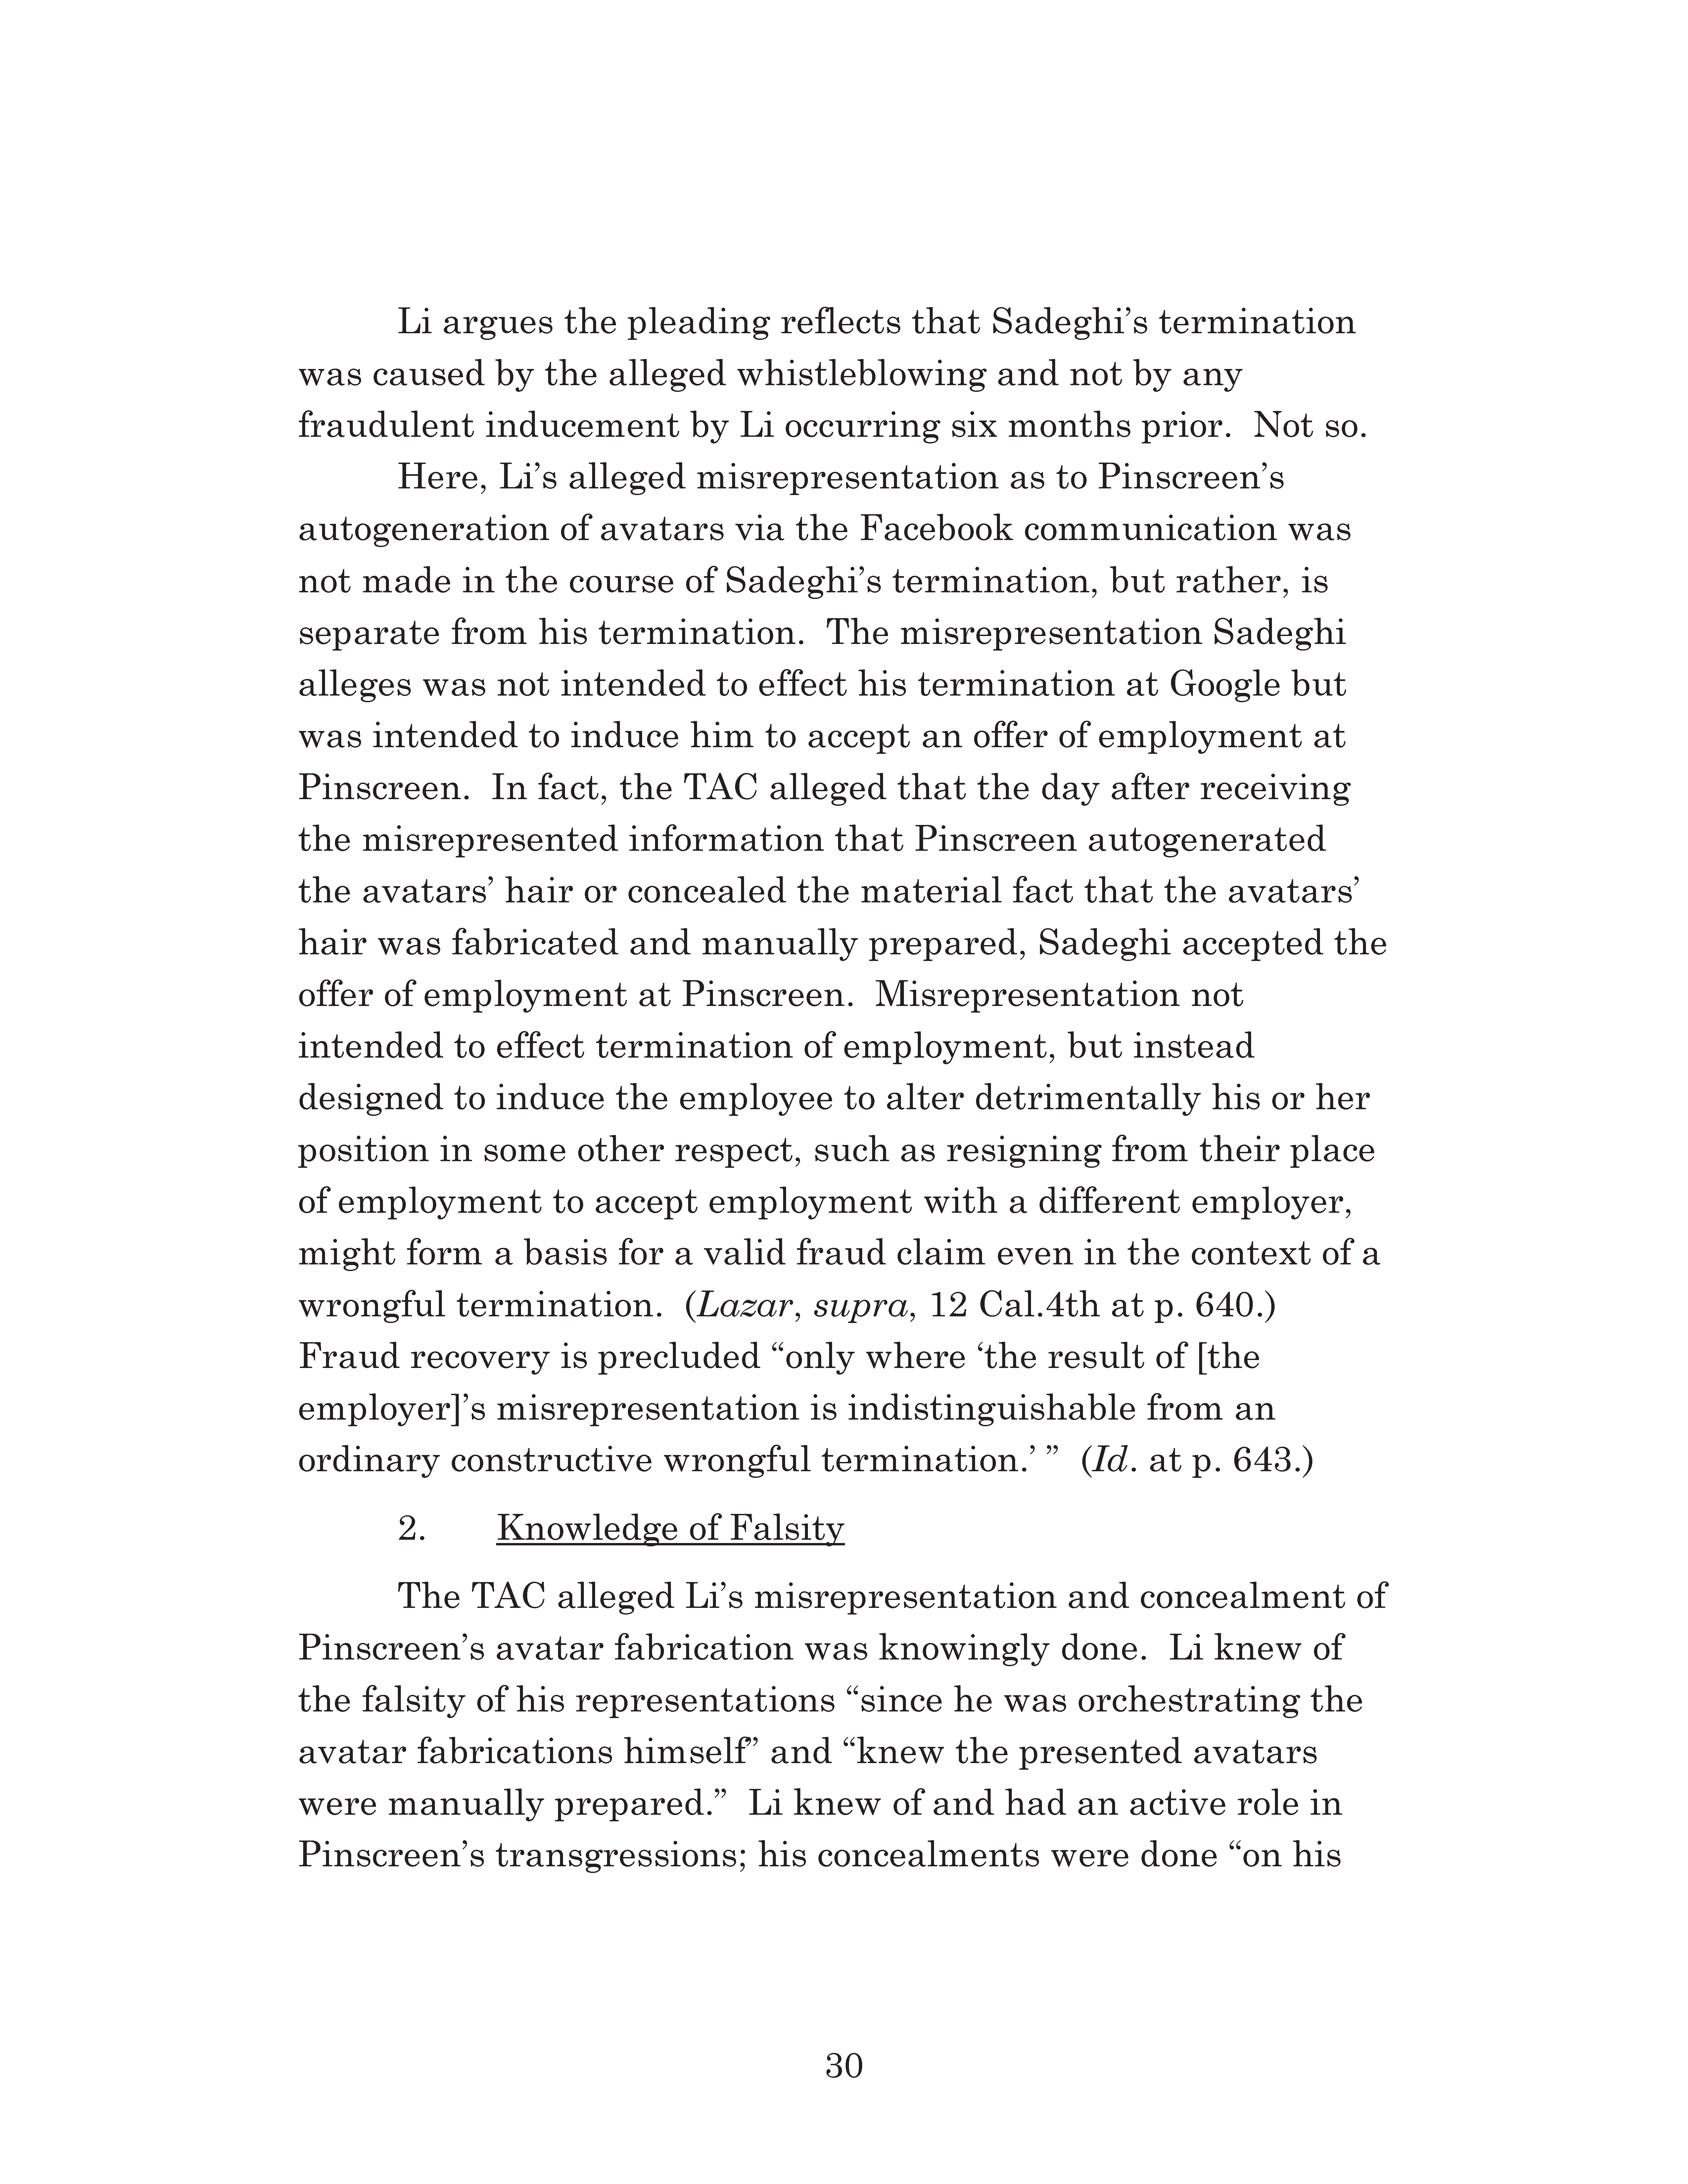 Appellate Court's Opinion Upholding Sadeghi's Claims for Fraud, Battery and IIED Against Li Page 30